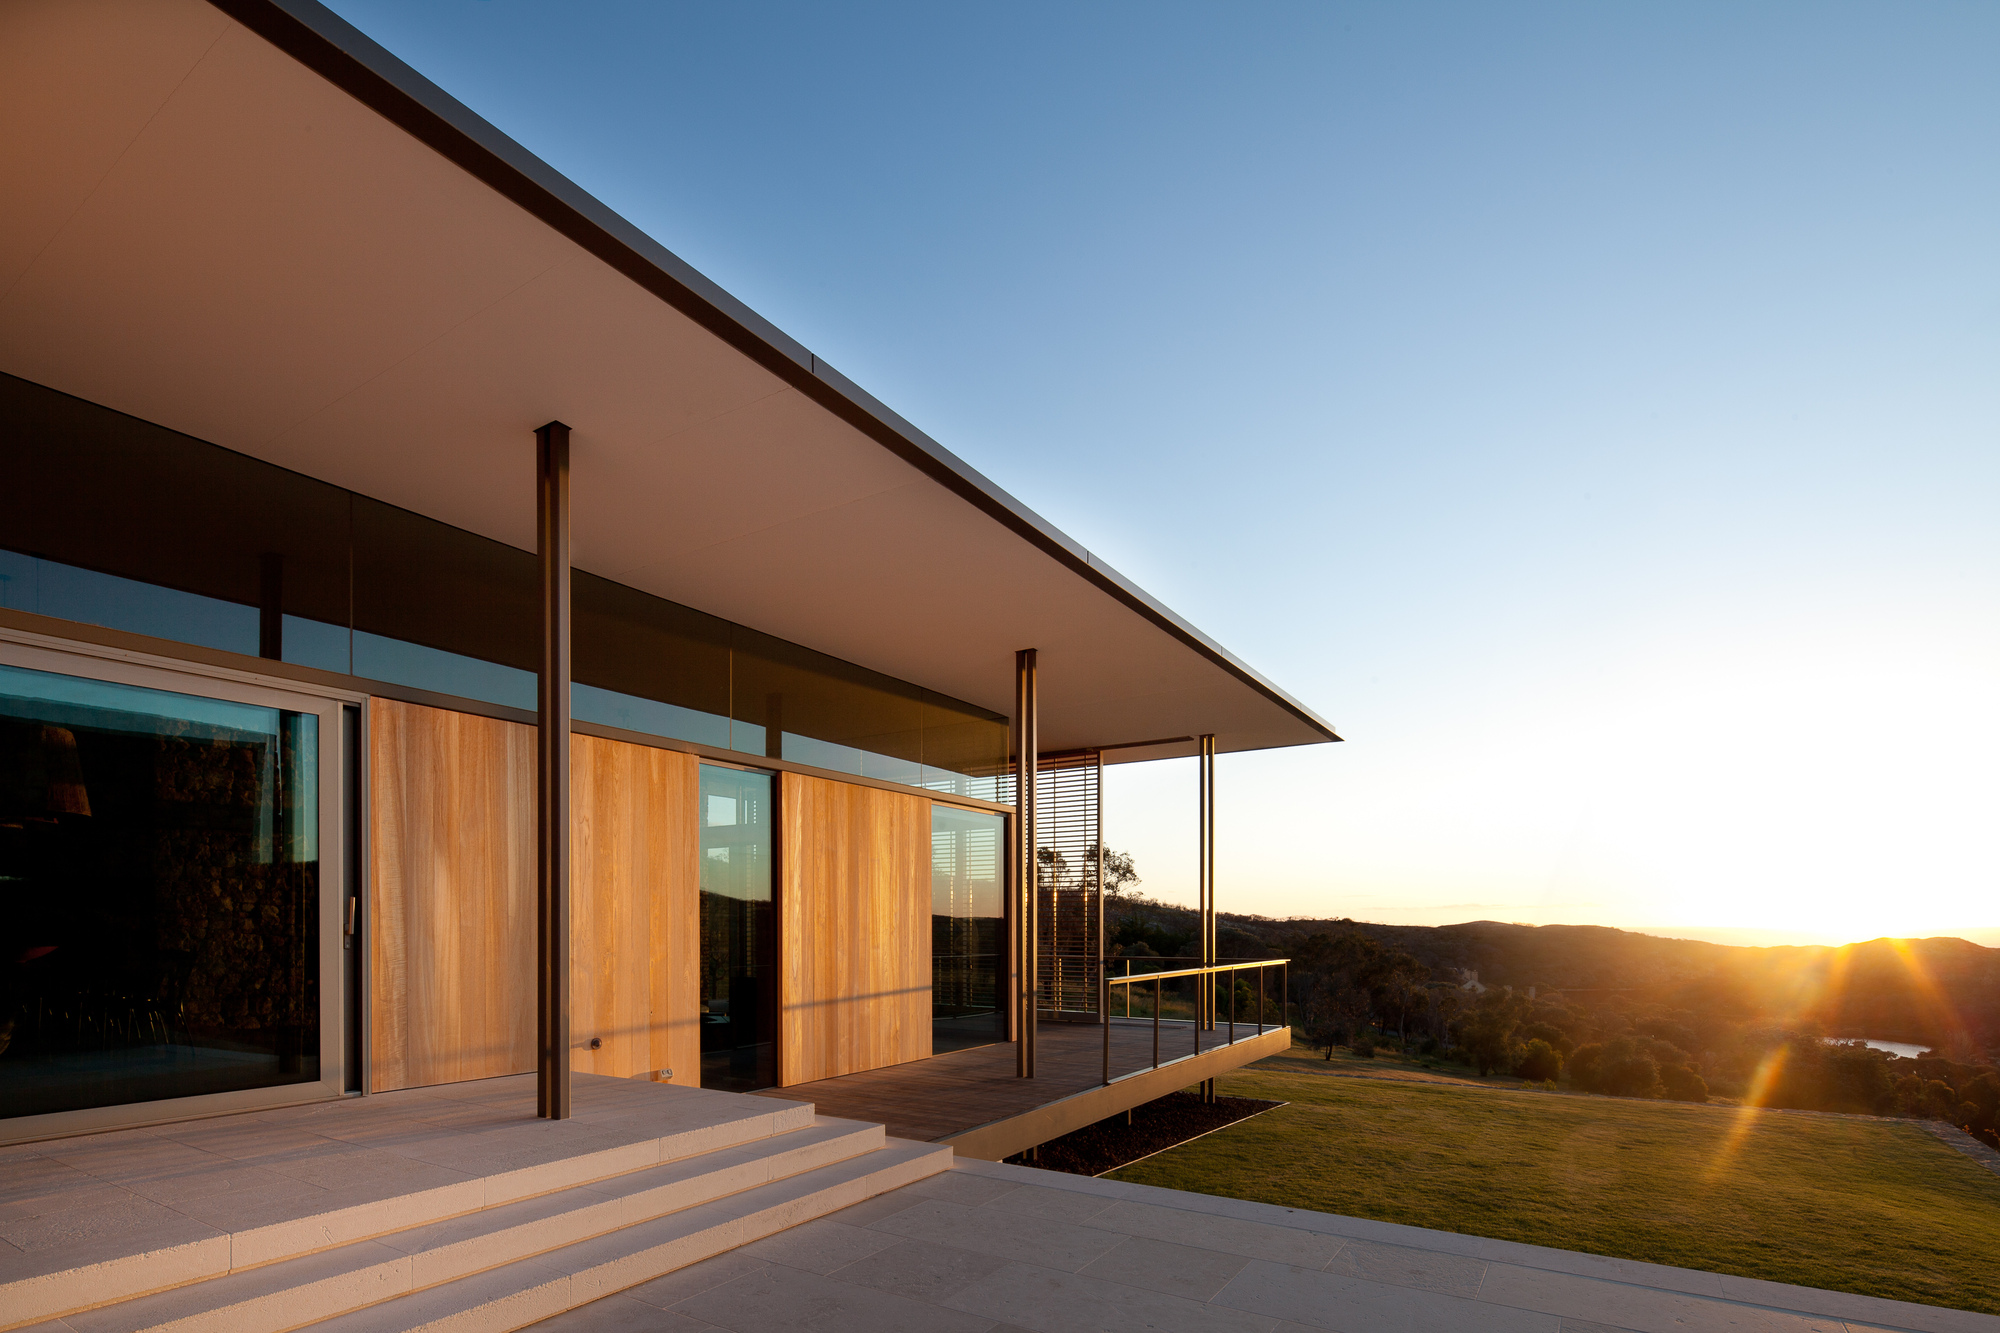 ... Back to : Landscaped House in South-Western Australia by Tierra Design